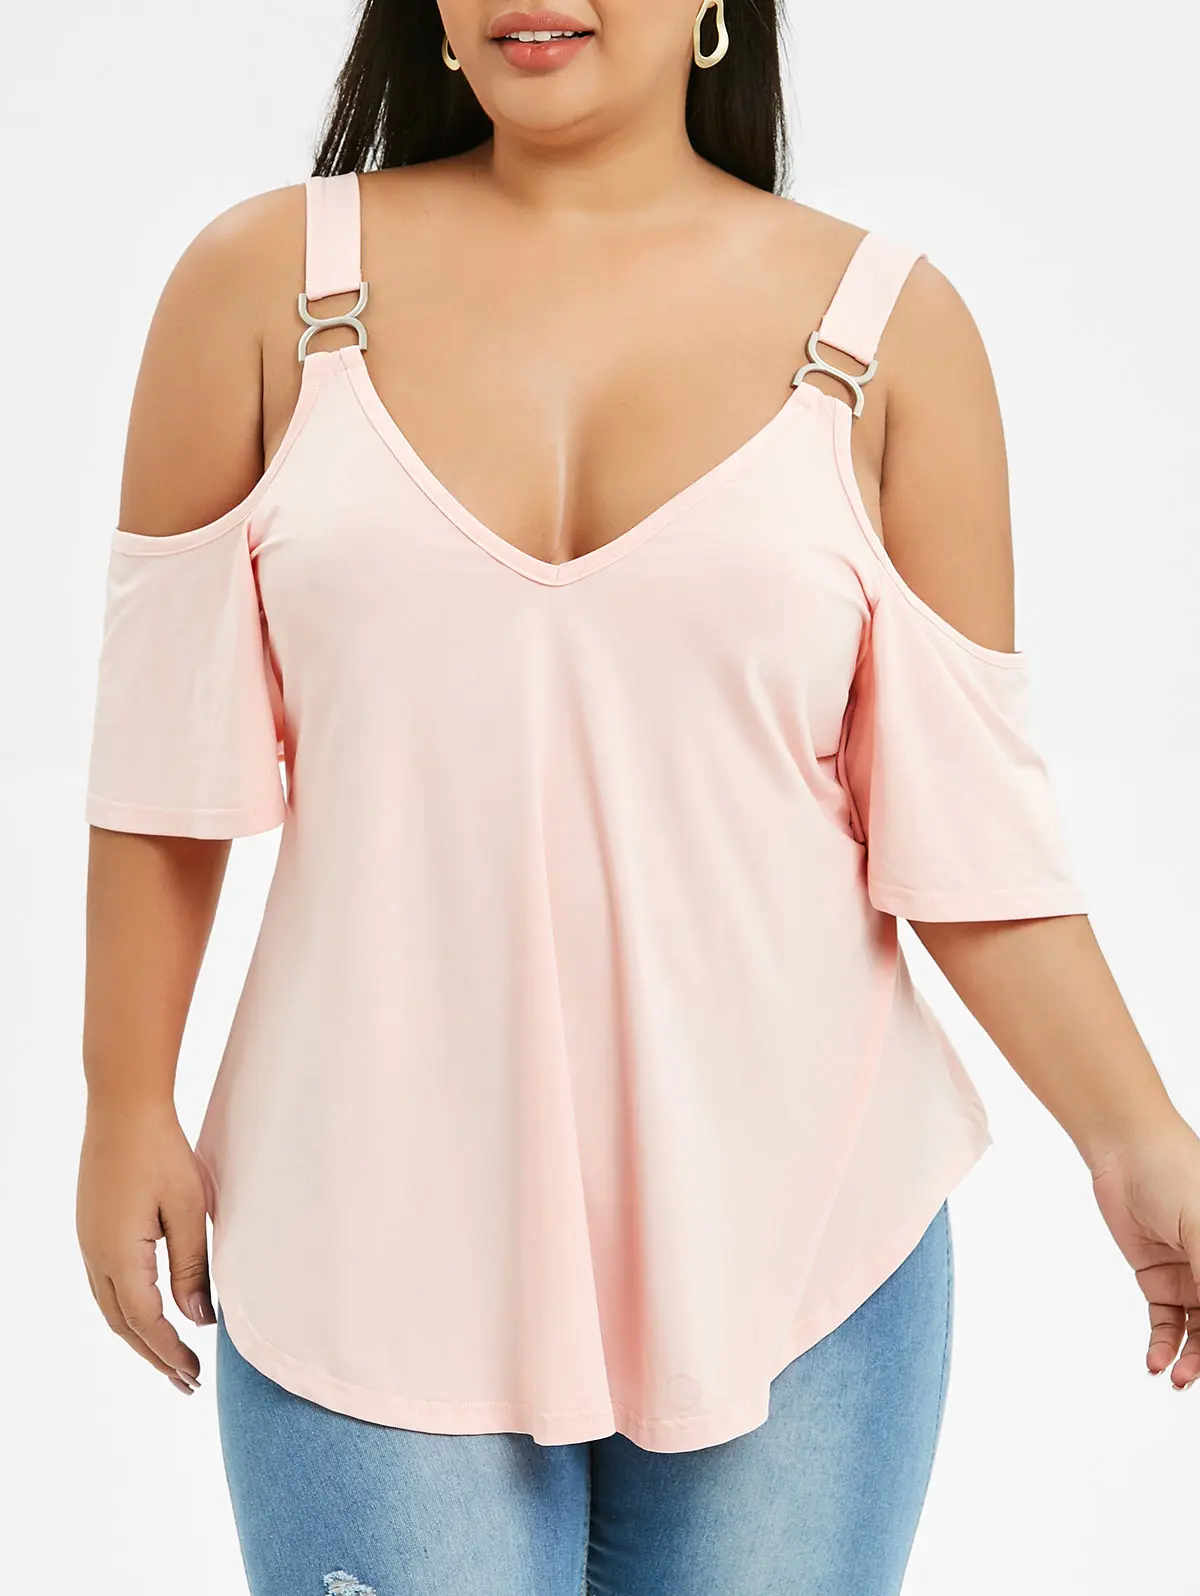 Rosegal Plus Size Cold Shoulder Tunic T Shirt V Neck Sexy Summer Tops Short  Sleeves Open Back Casual Women Clothes Big Size|T-Shirts| - AliExpress